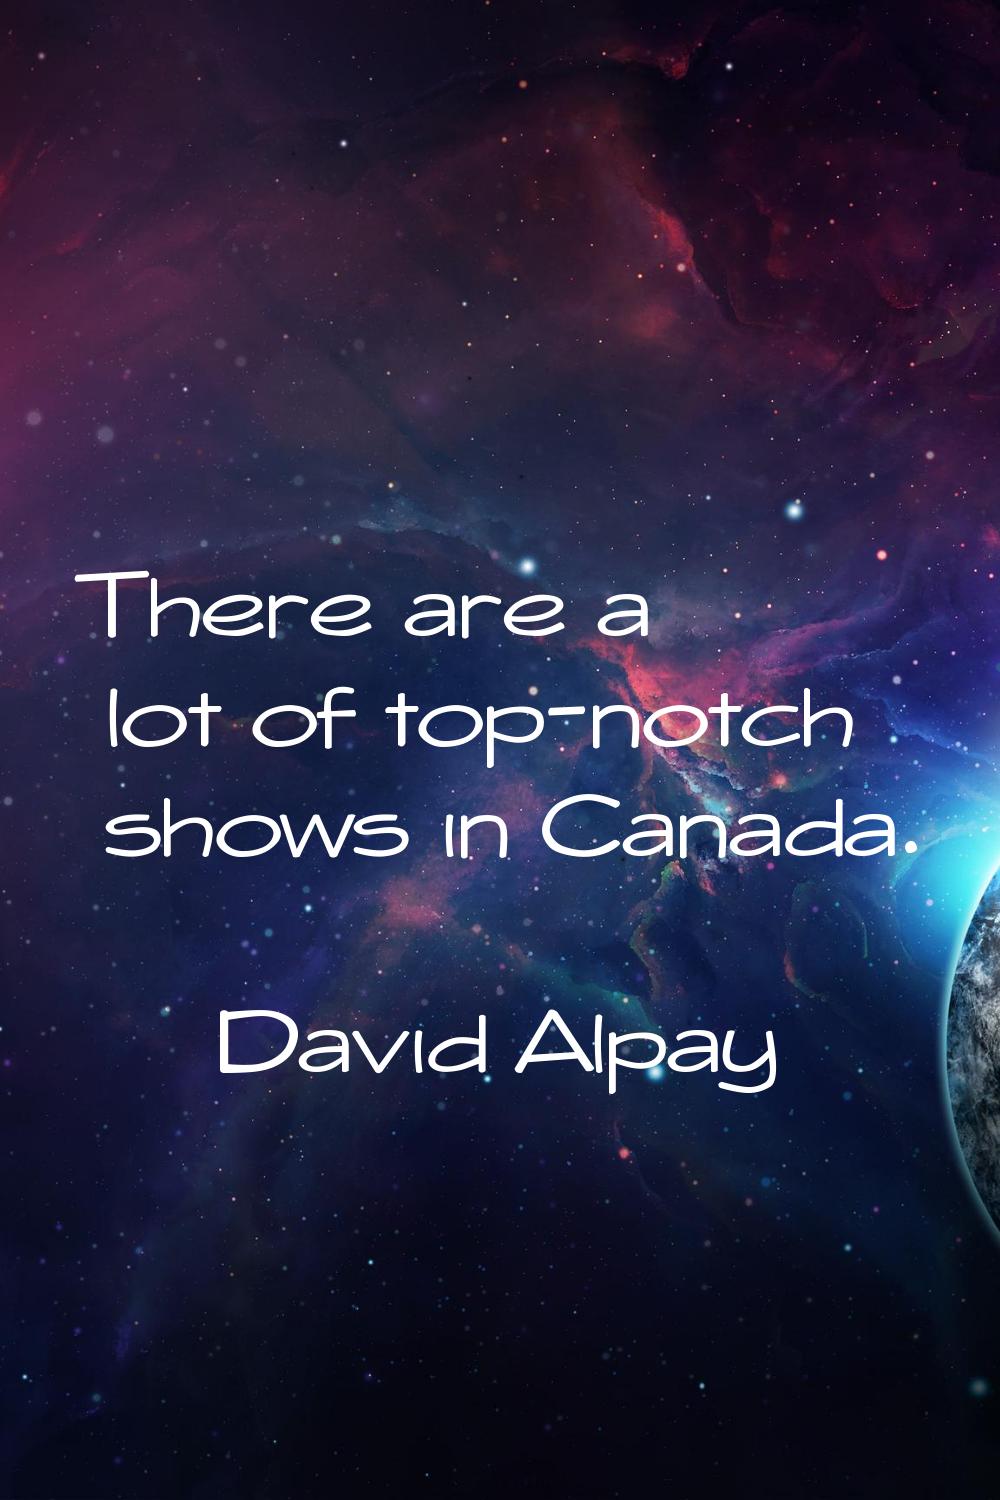 There are a lot of top-notch shows in Canada.